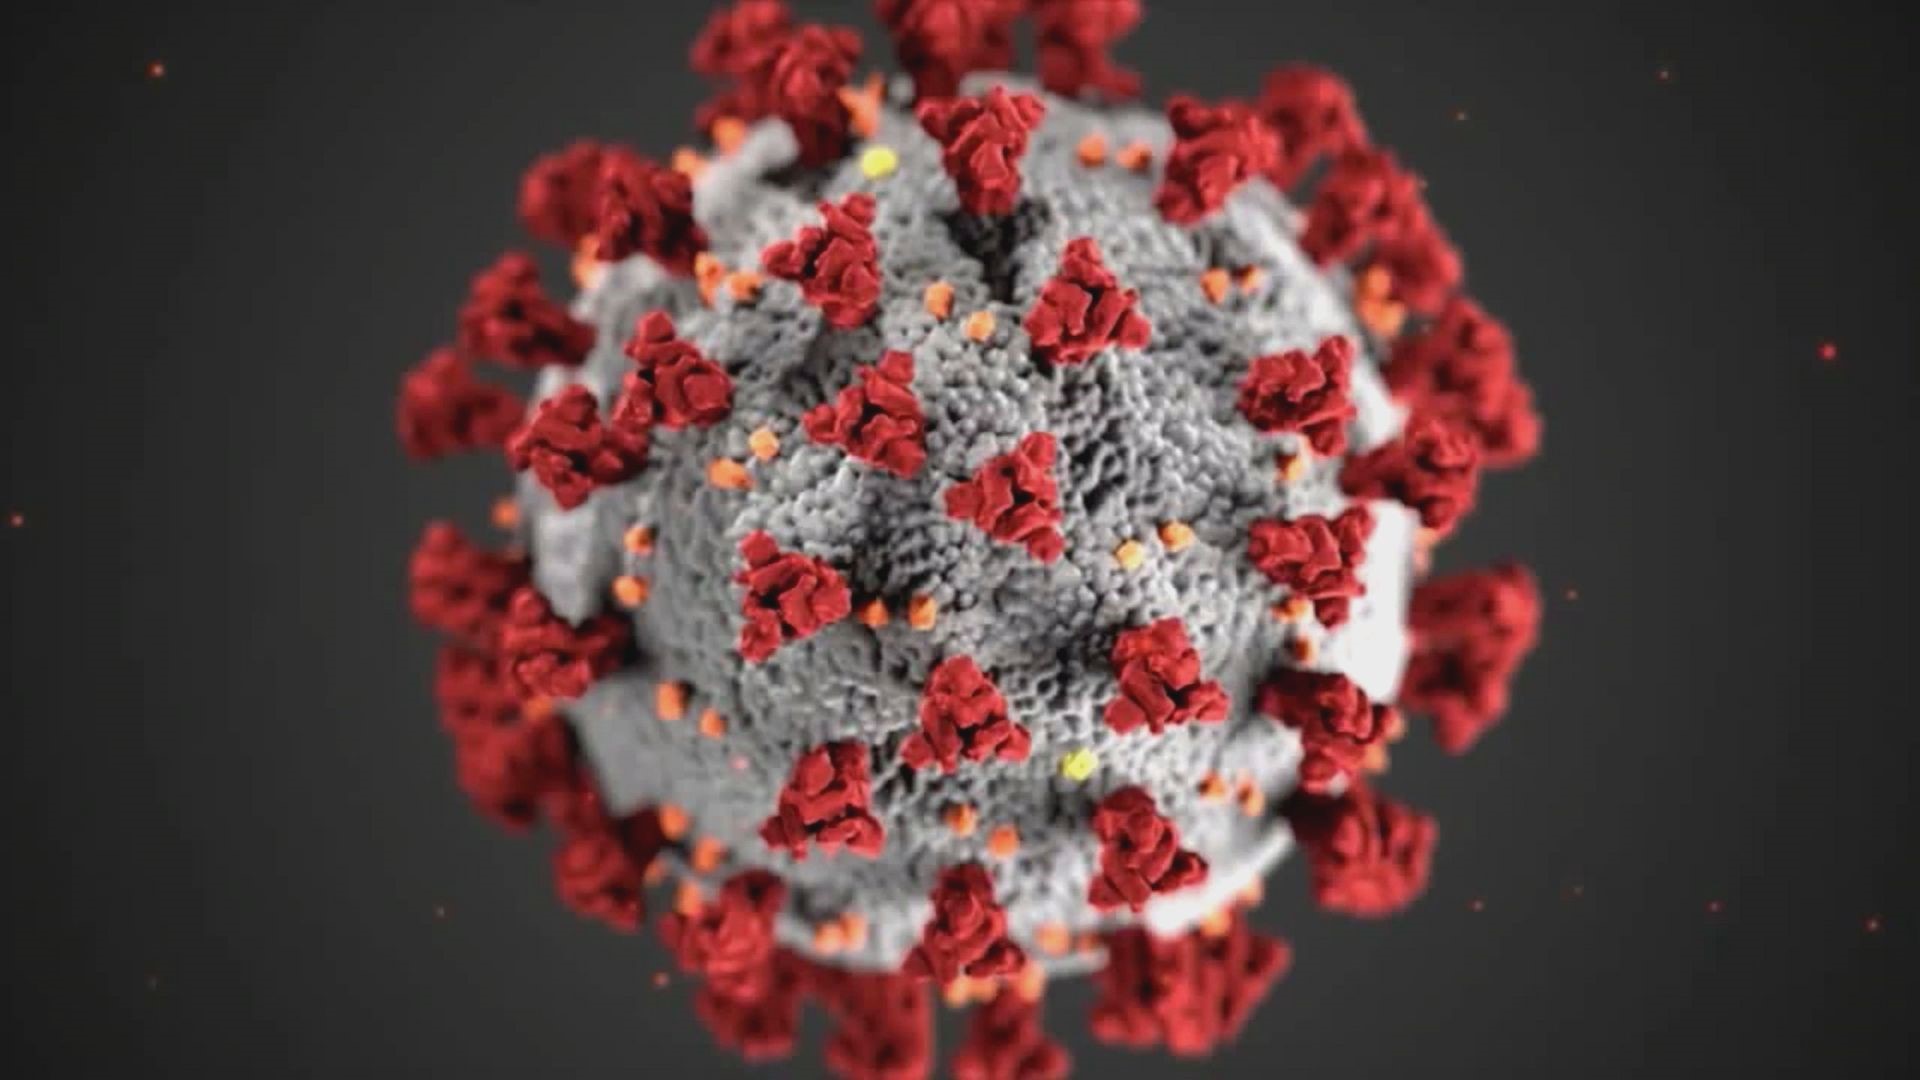 Doctor Aileen Marty, a Professor of Infectious Disease at Florida International University, says the virus survives differently at different temperatures.